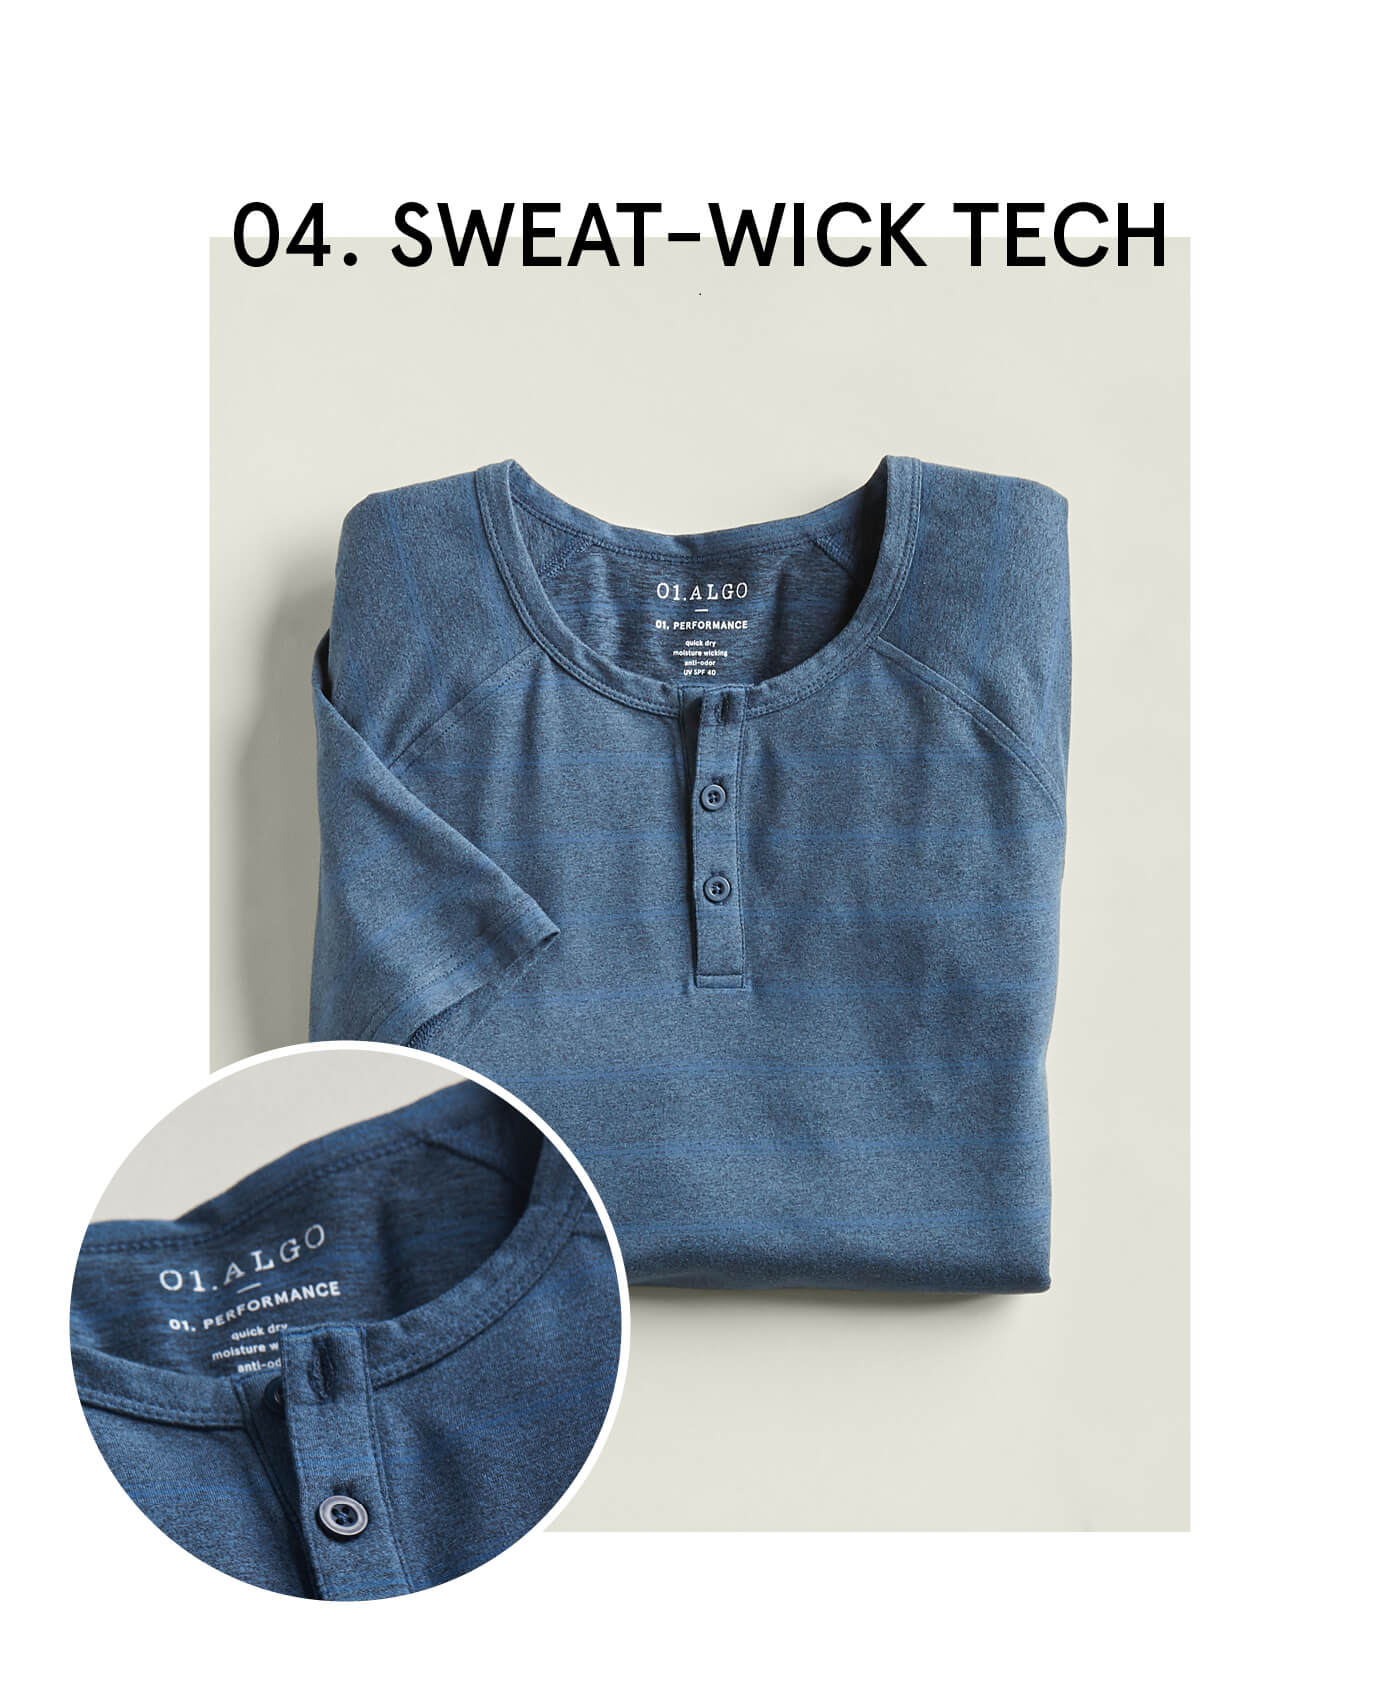 7 Fabrics to Keep You Sweat-Free and Smelling Clean | Stitch Fix Men